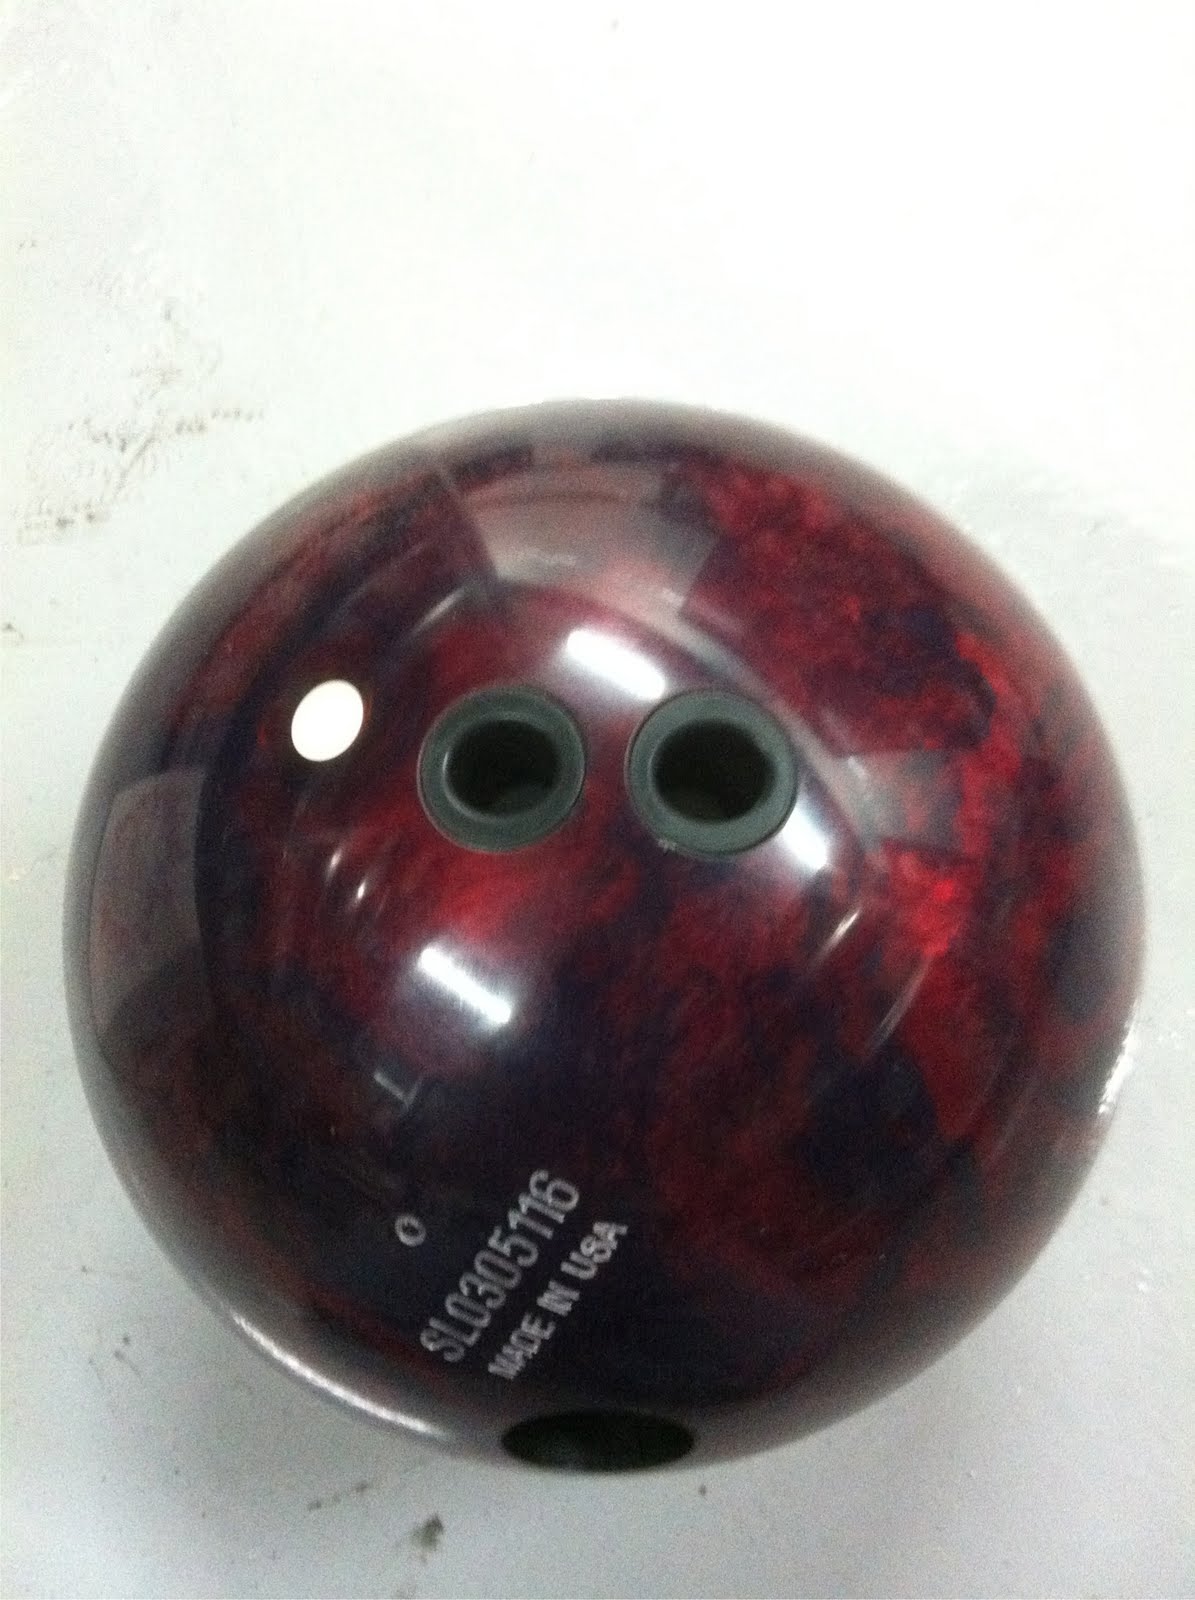 Storm is my name and bowling is my game: Visionary Bowling Balls